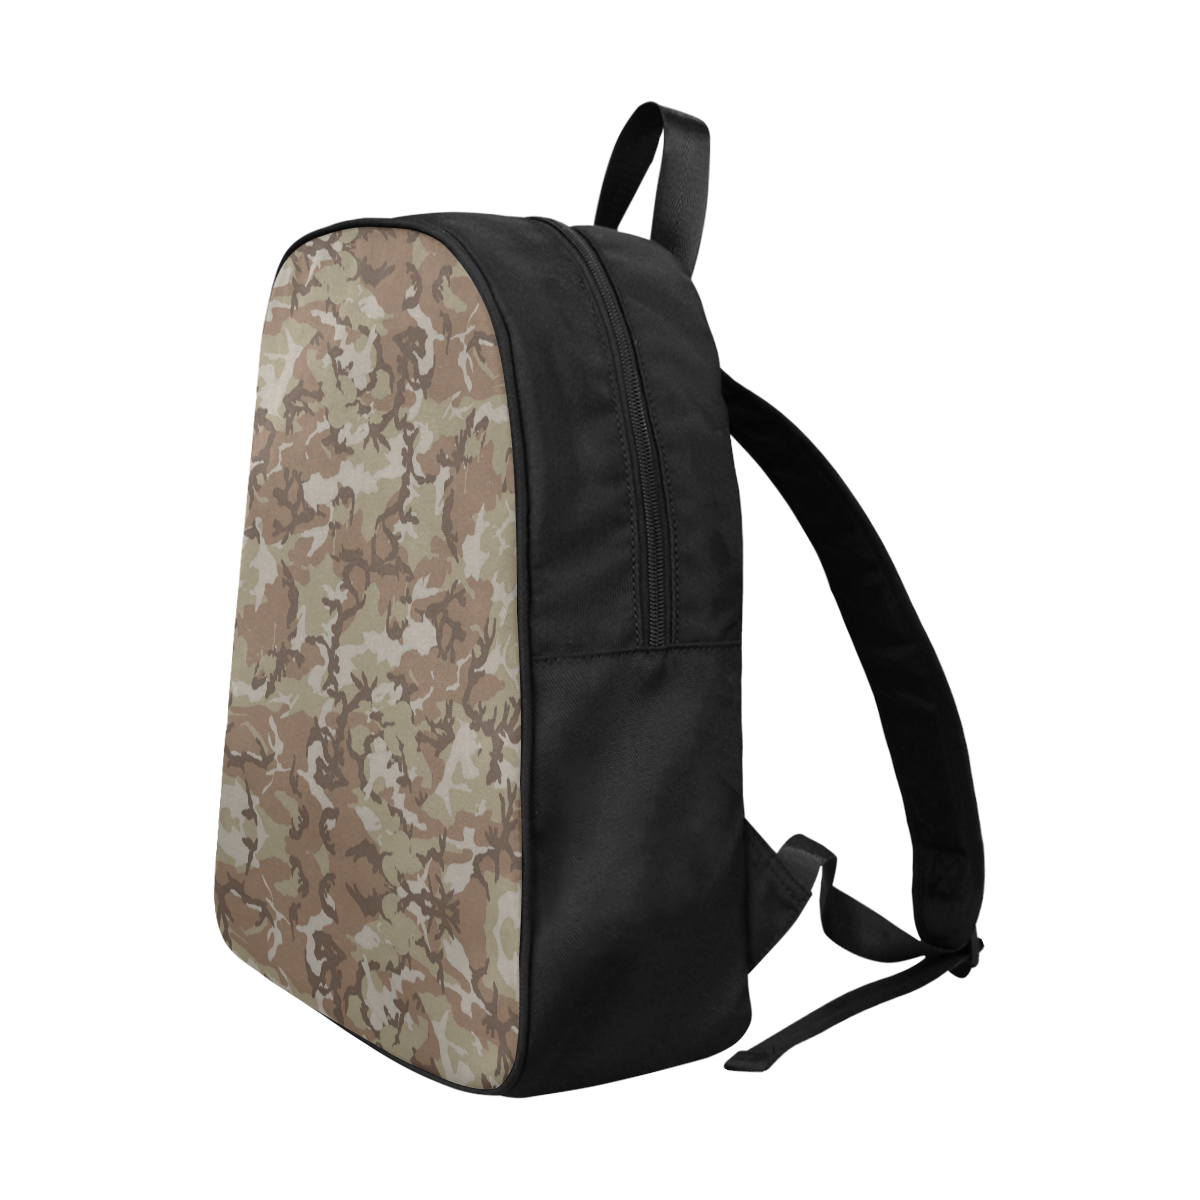 Woodland Desert Brown Camouflage Fabric School Backpack (Model 1682) (Large)